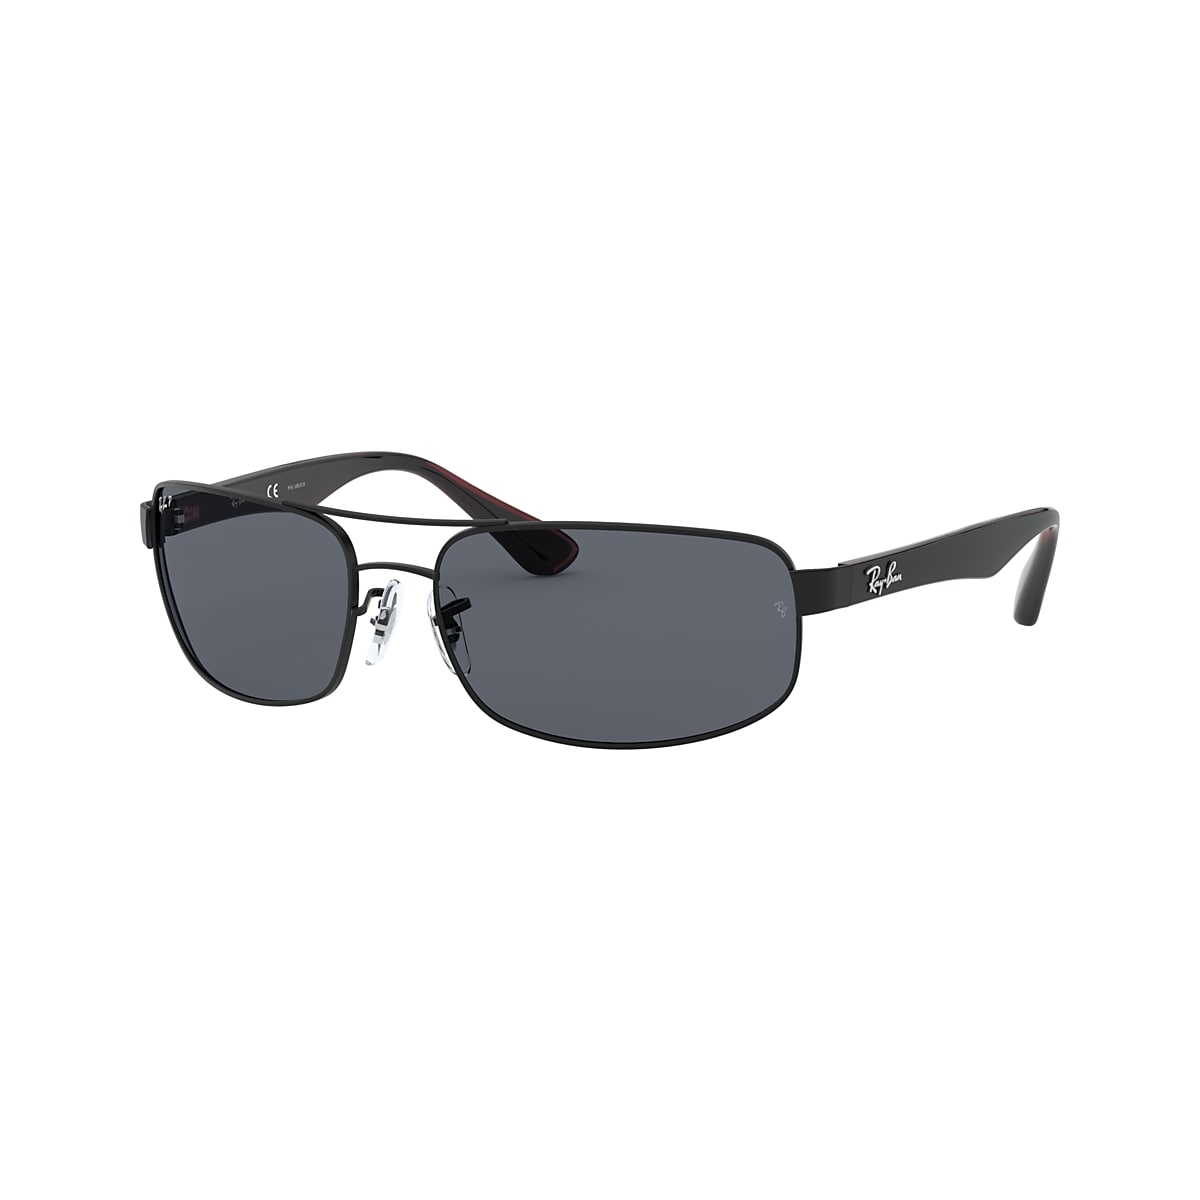 Ray-Ban 0RB3445 Sunglasses in Black | Target Optical